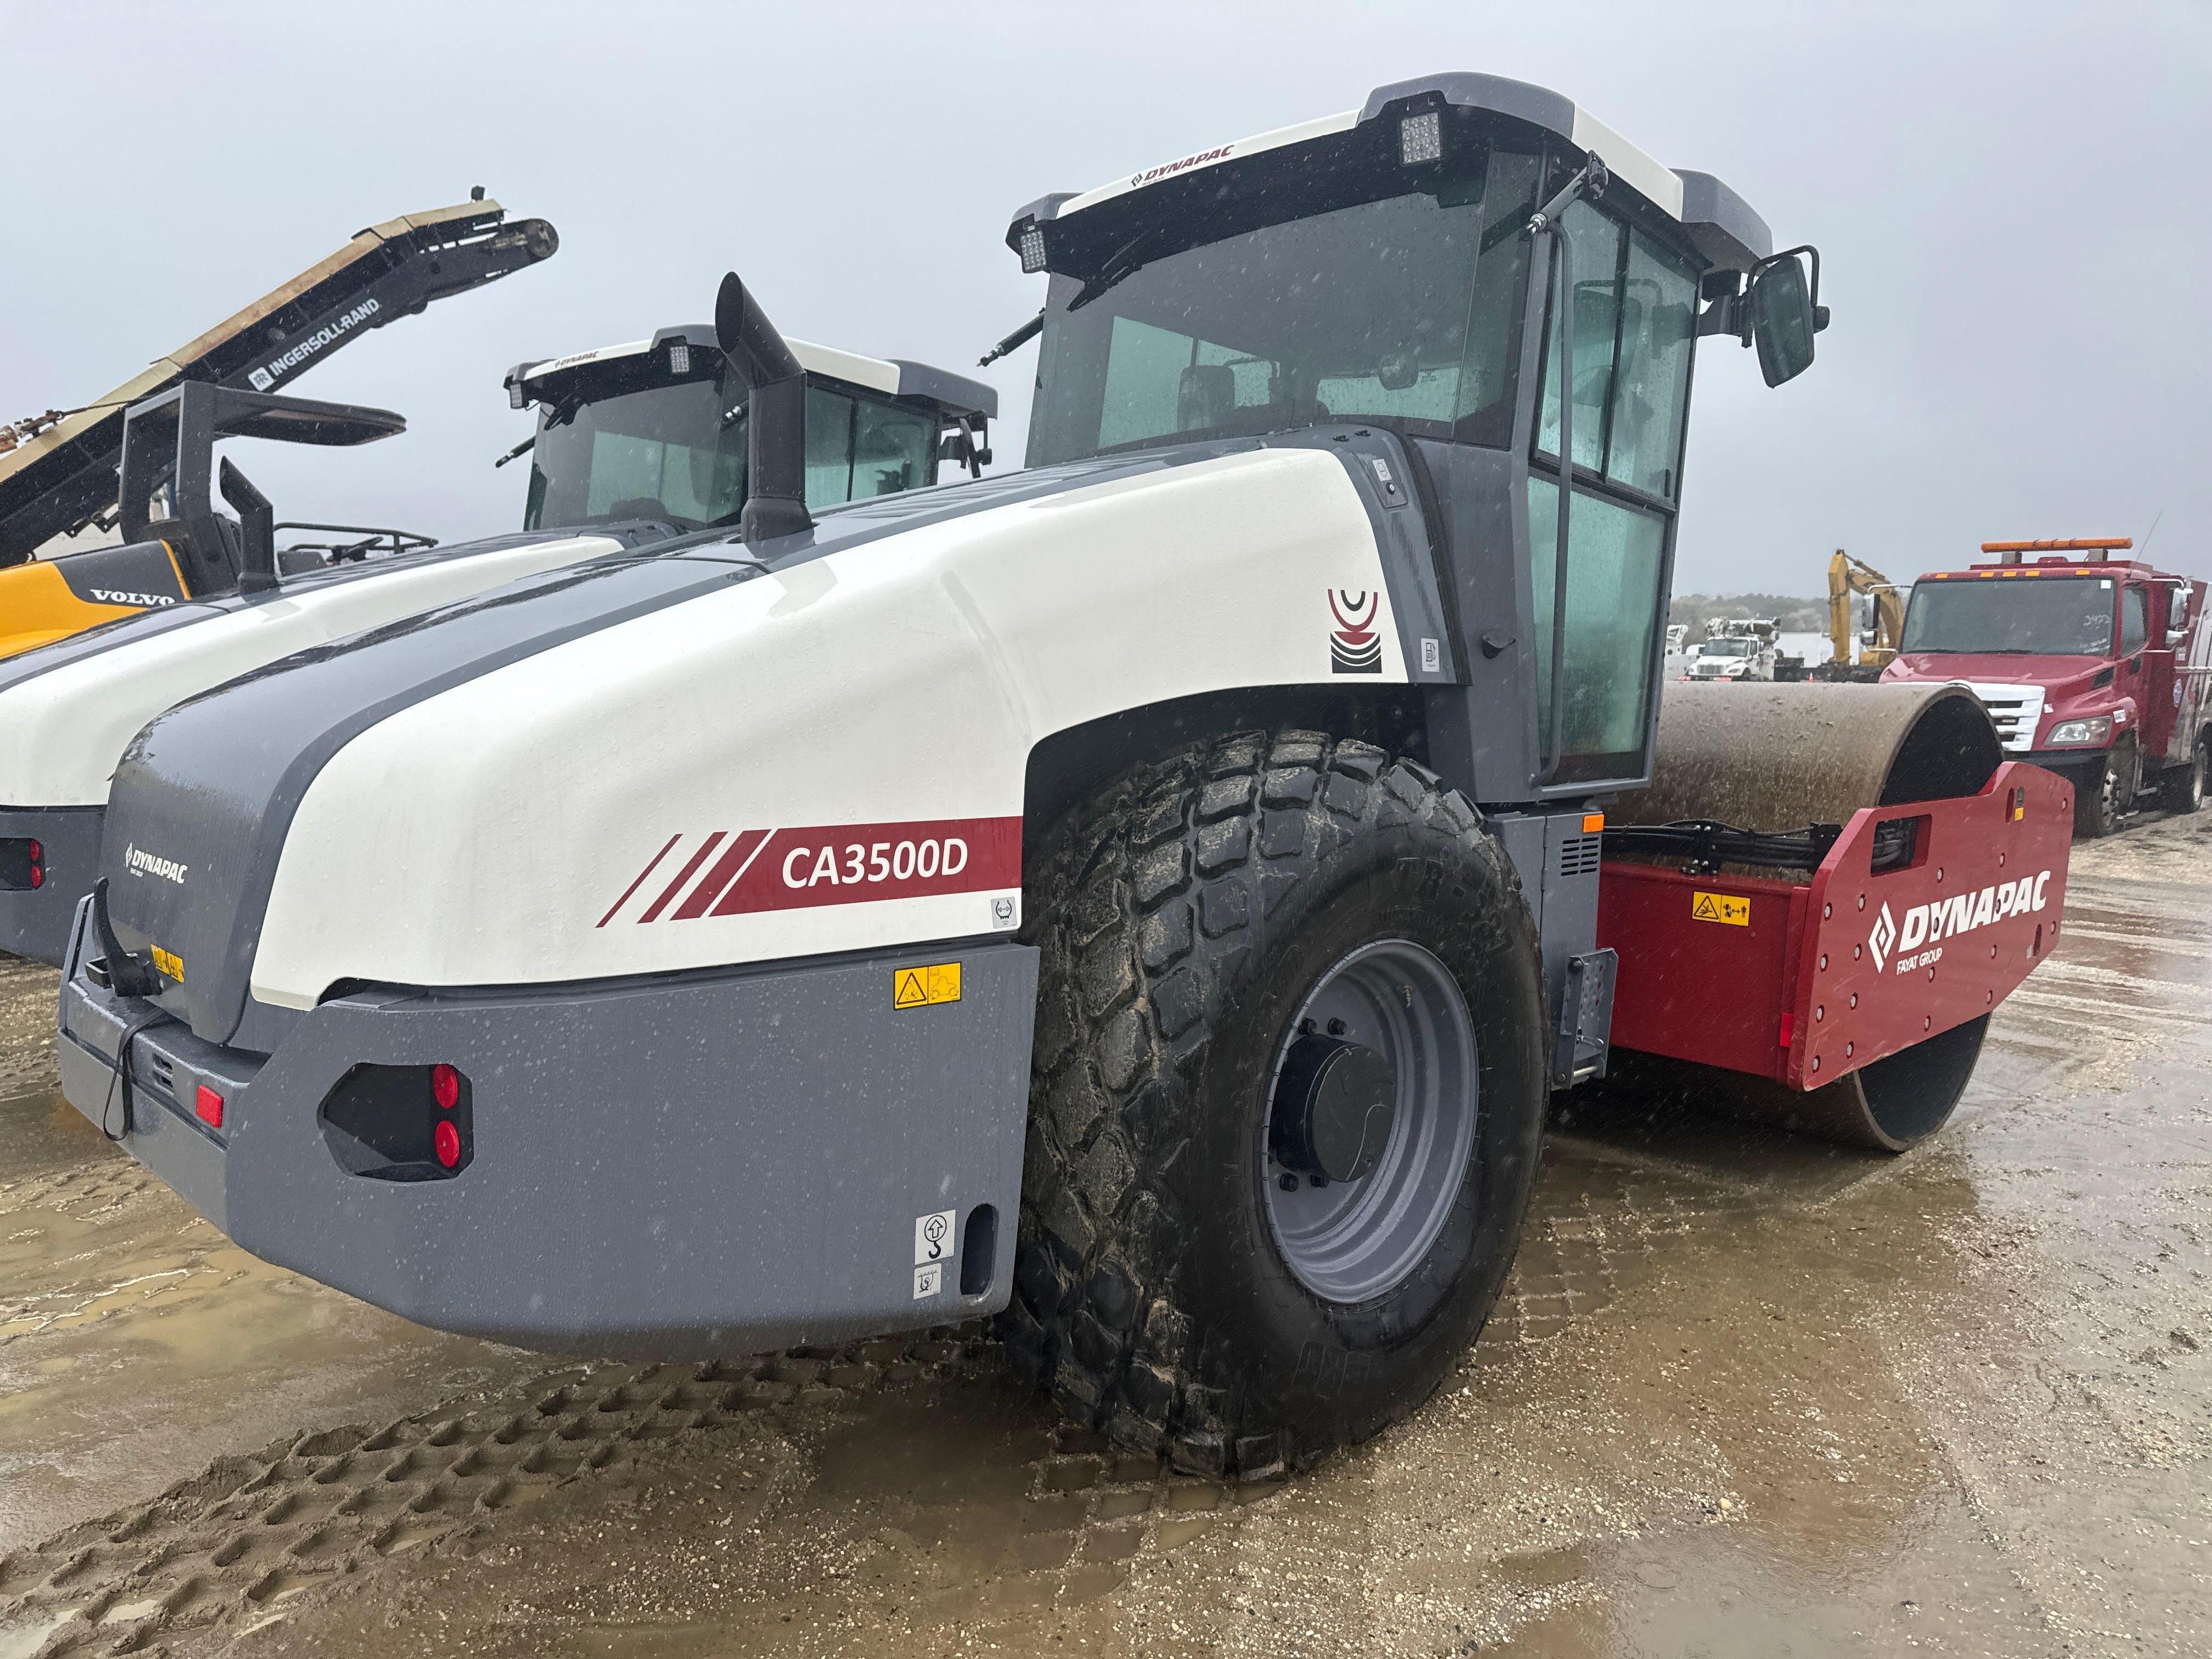 2021 DYNAPAC CA3500D VIBRATORY ROLLER SN:A032085 powered by Cummins F3.8 diesel engine, equipped